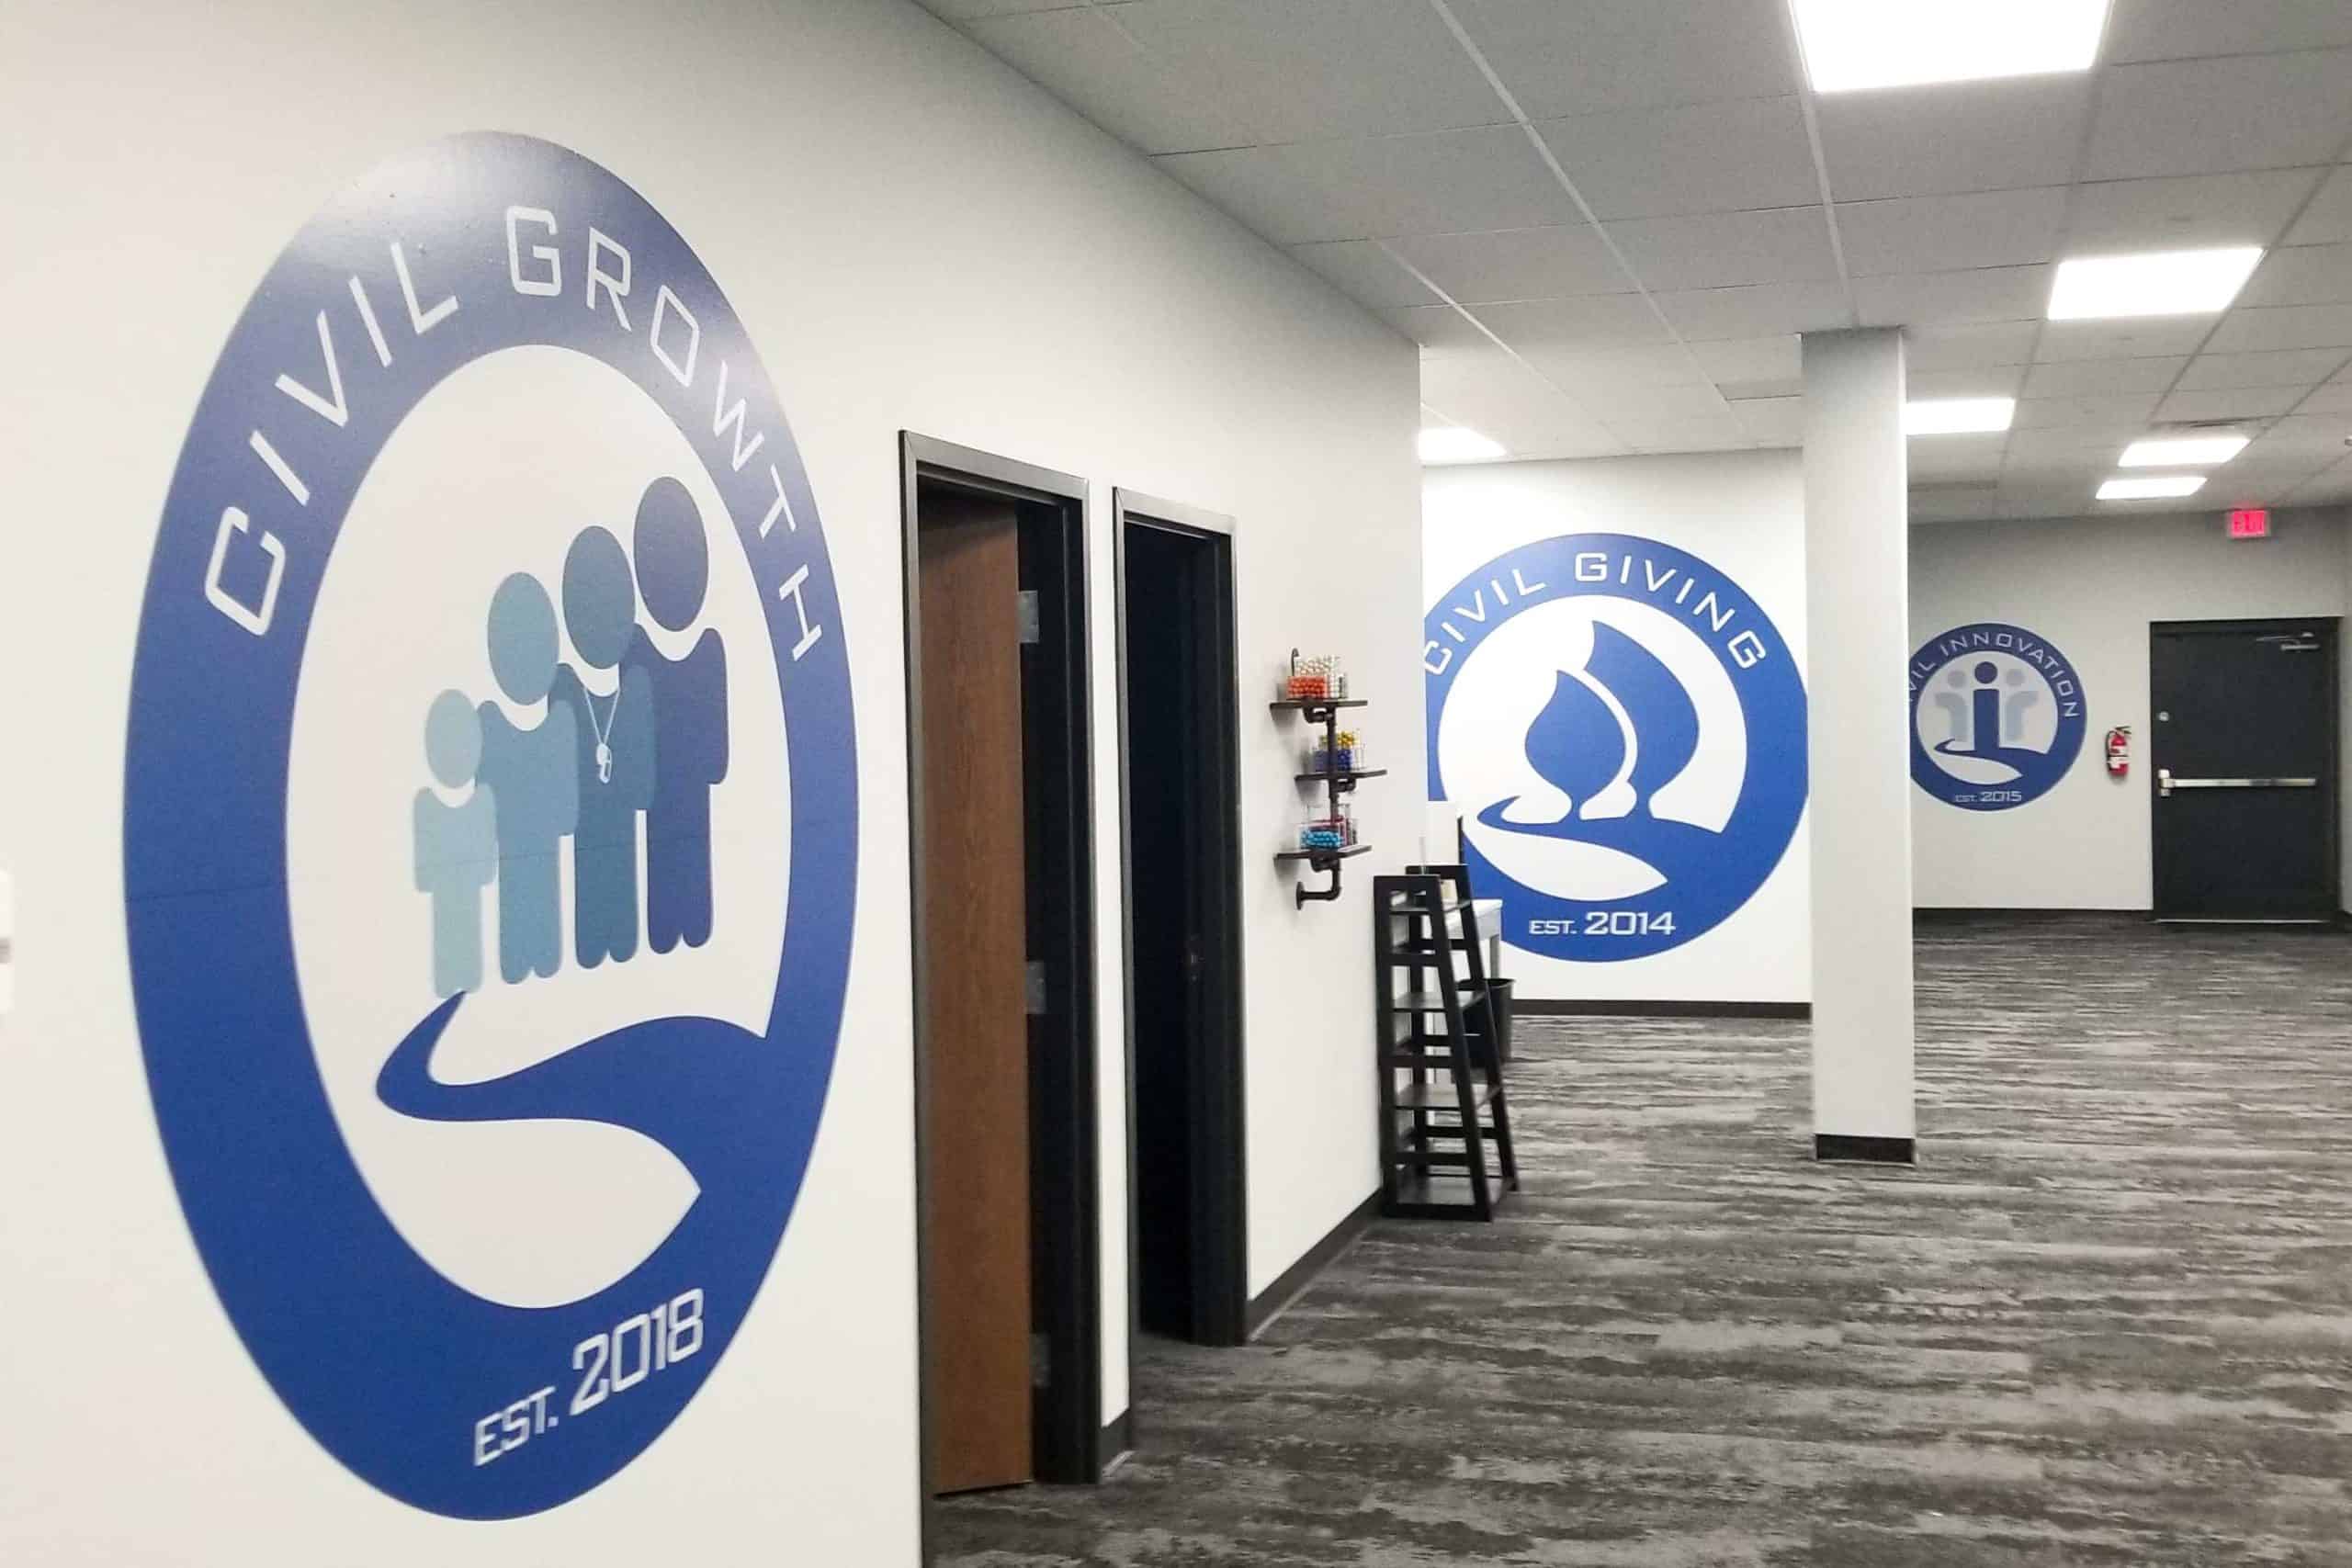 Office space design with vinyl graphics for CDI values